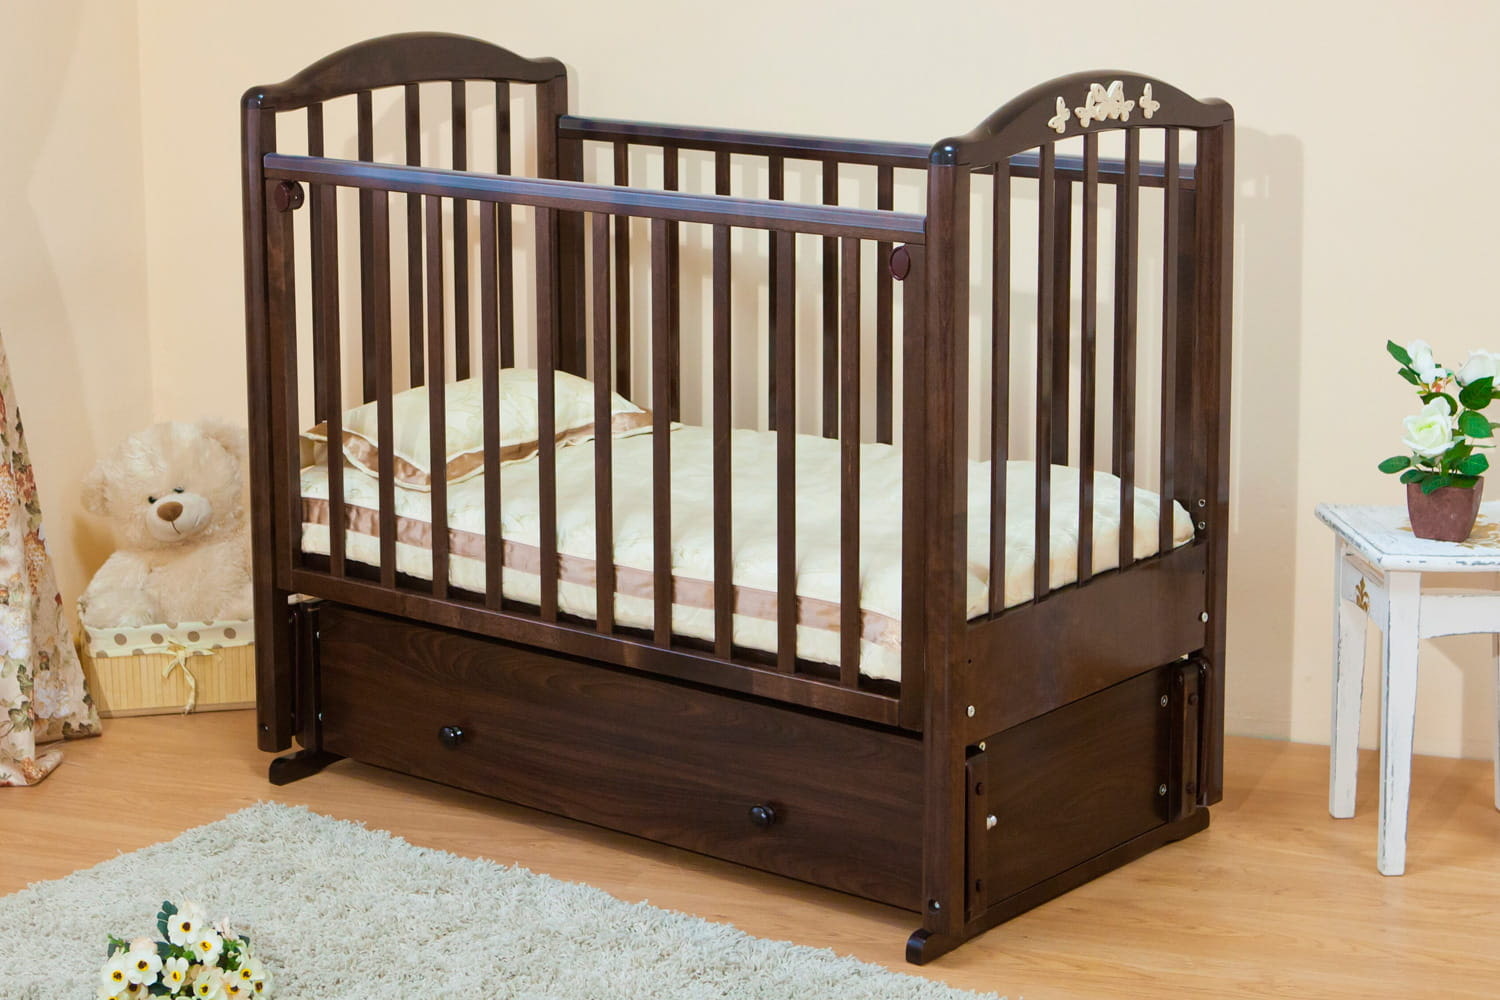 Baby beds for newborns: small and stylish options, interior photos